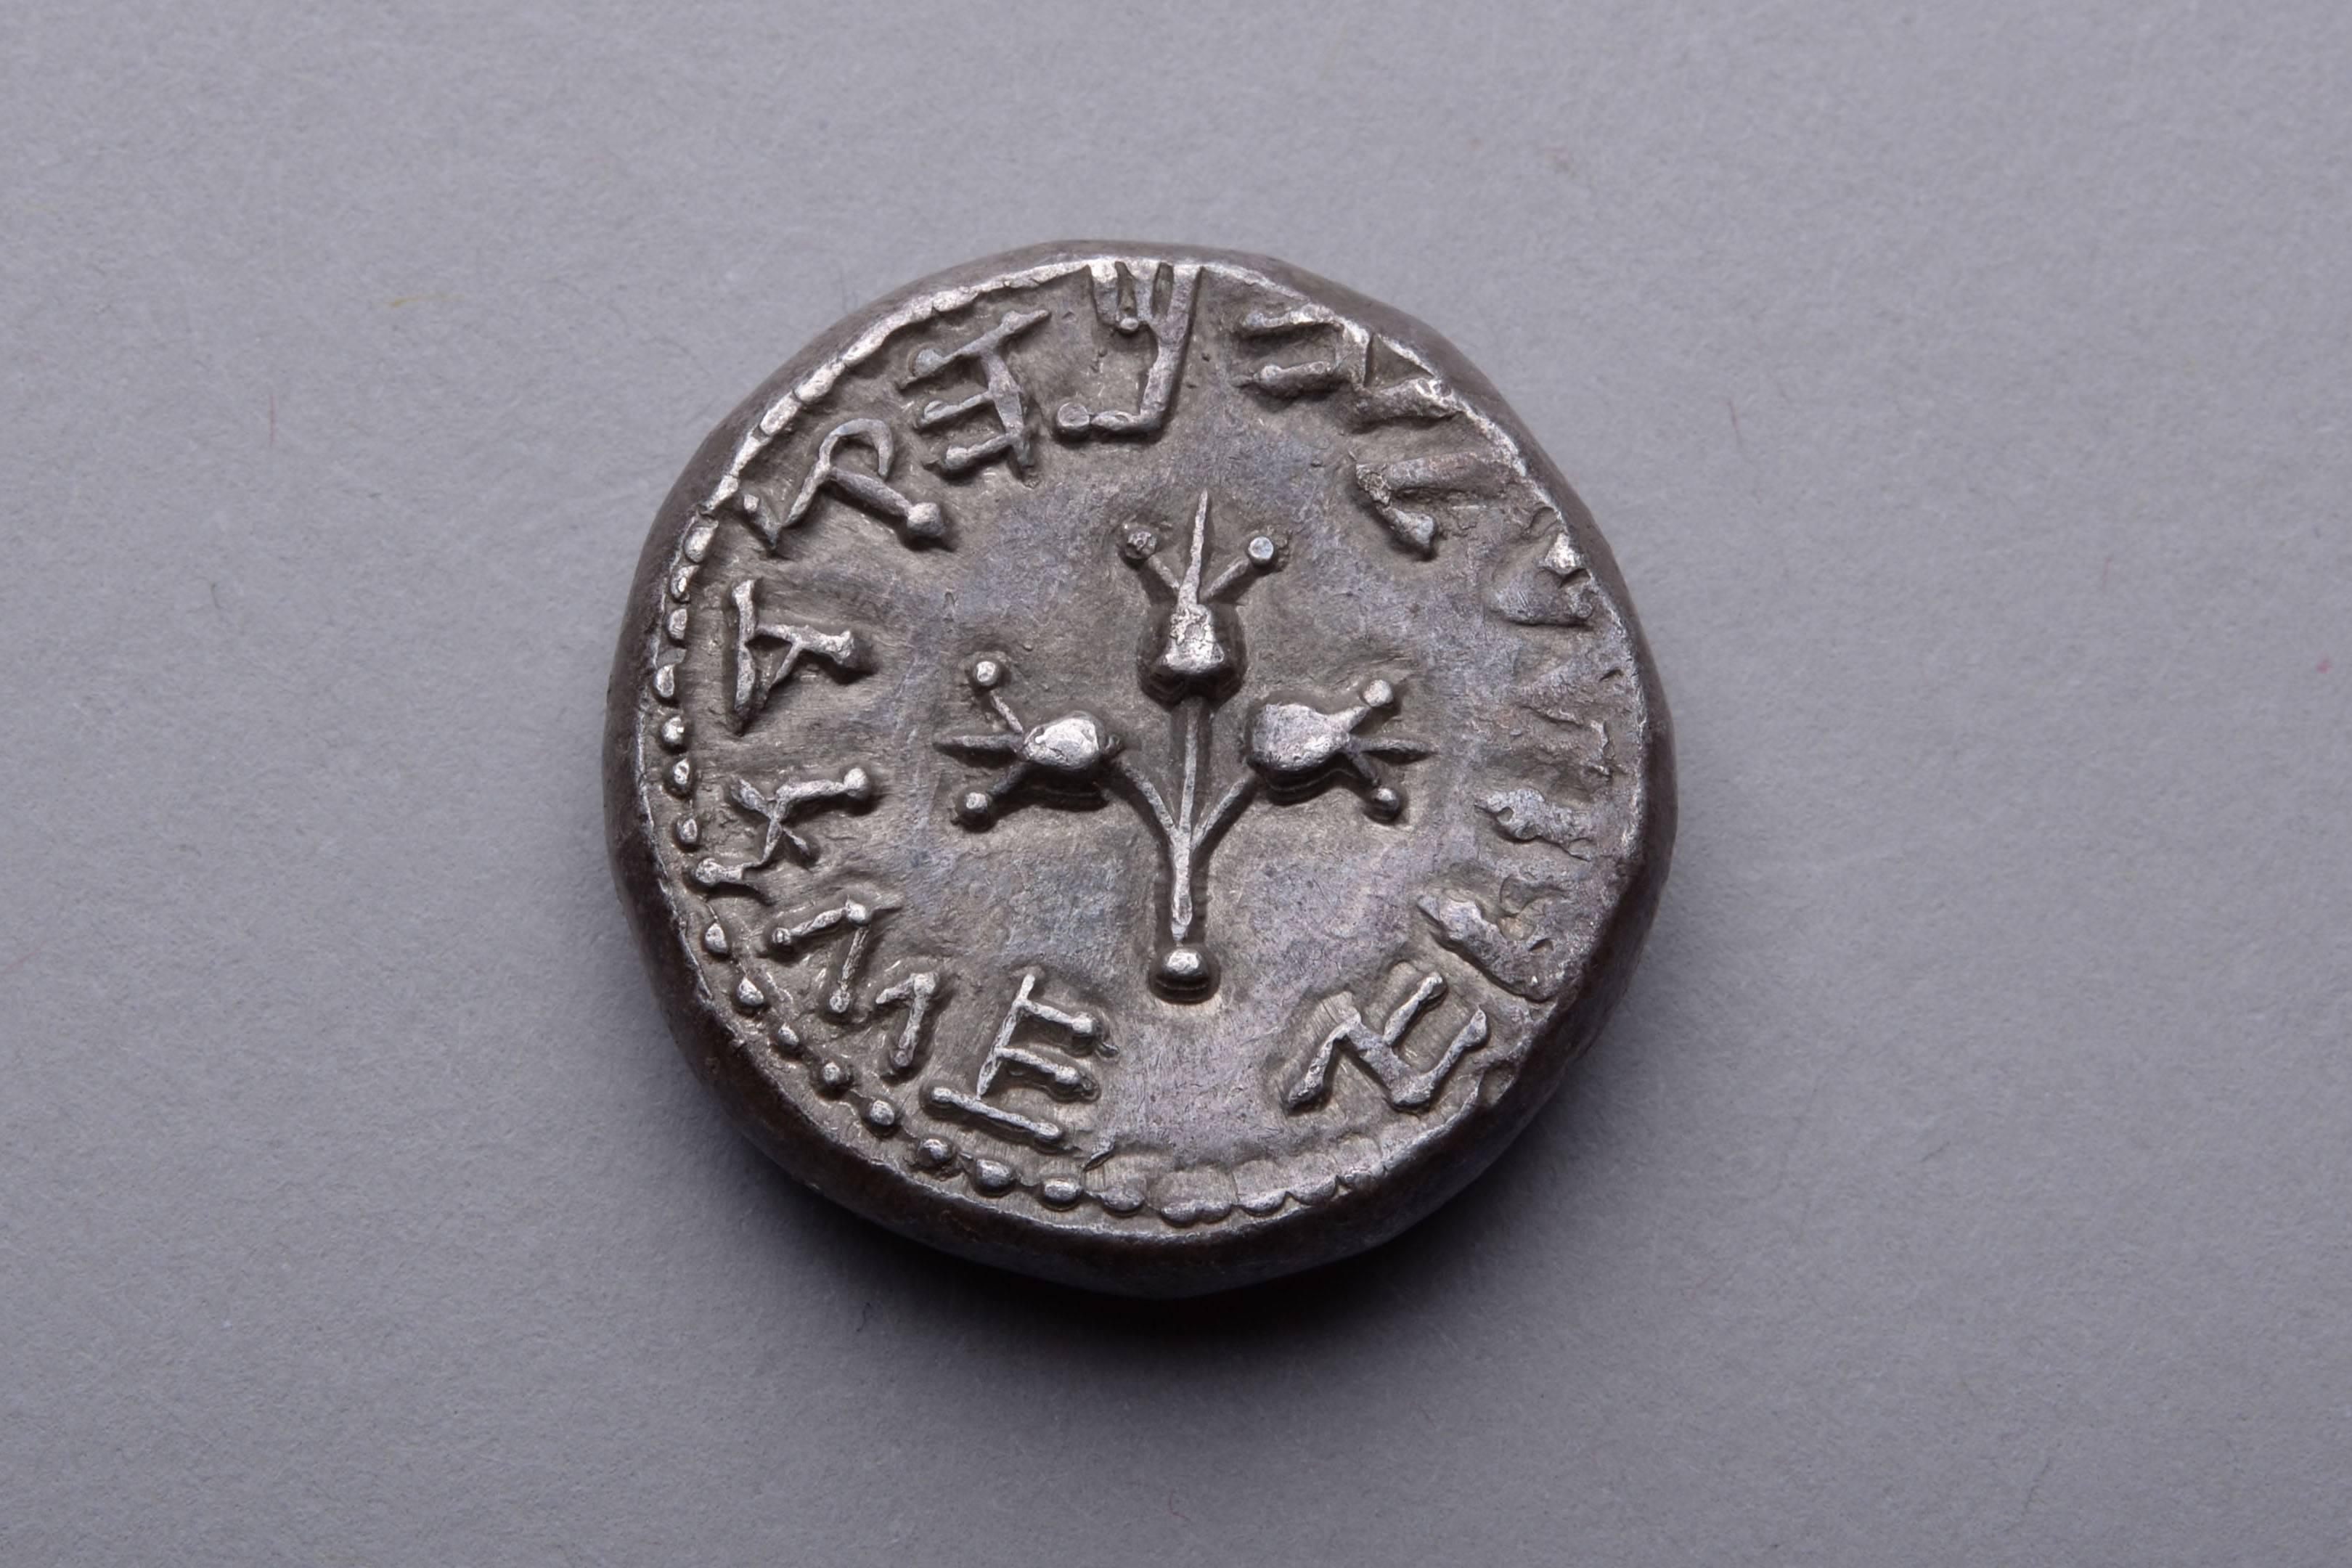 A truly remarkable object, the first and most famous silver coin minted by the Jews.

An ancient silver shekel minted by the Jewish people during the First Jewish-Roman War, also known as the Great Revolt or ha-Mered Ha-Gadol. Struck in the Holy